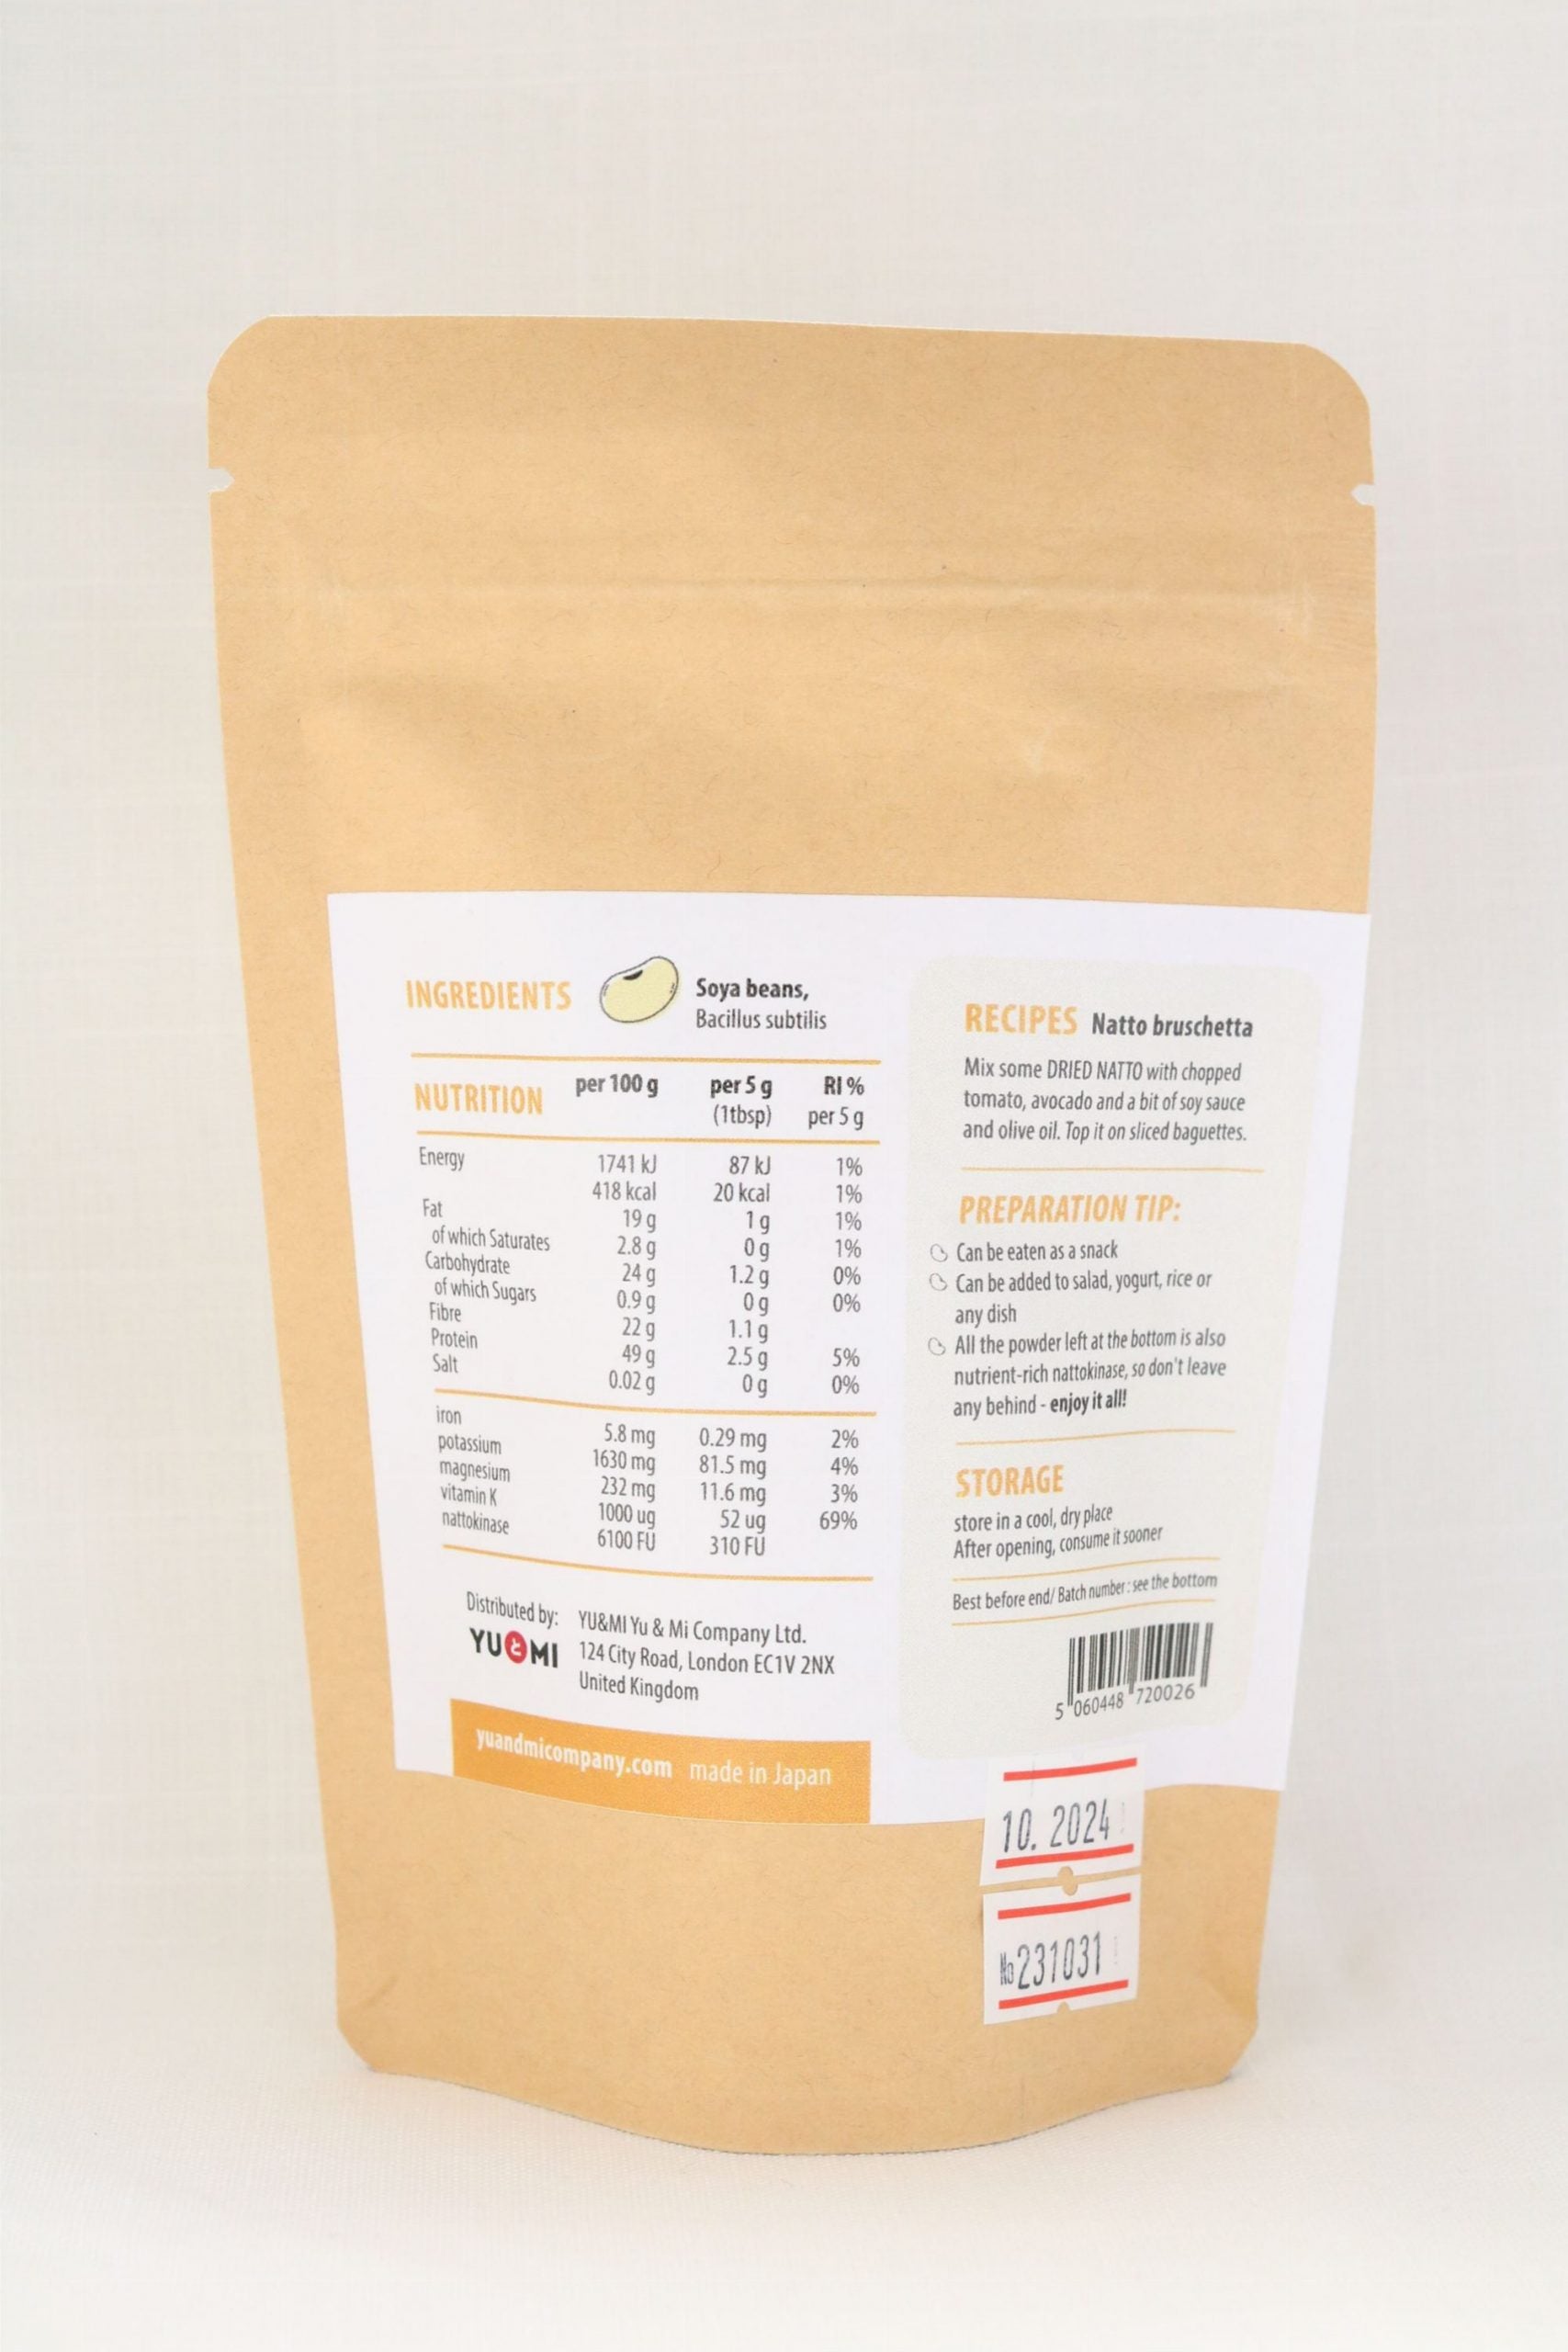 Dried Natto - freeze dried live fermented soya beans 30g